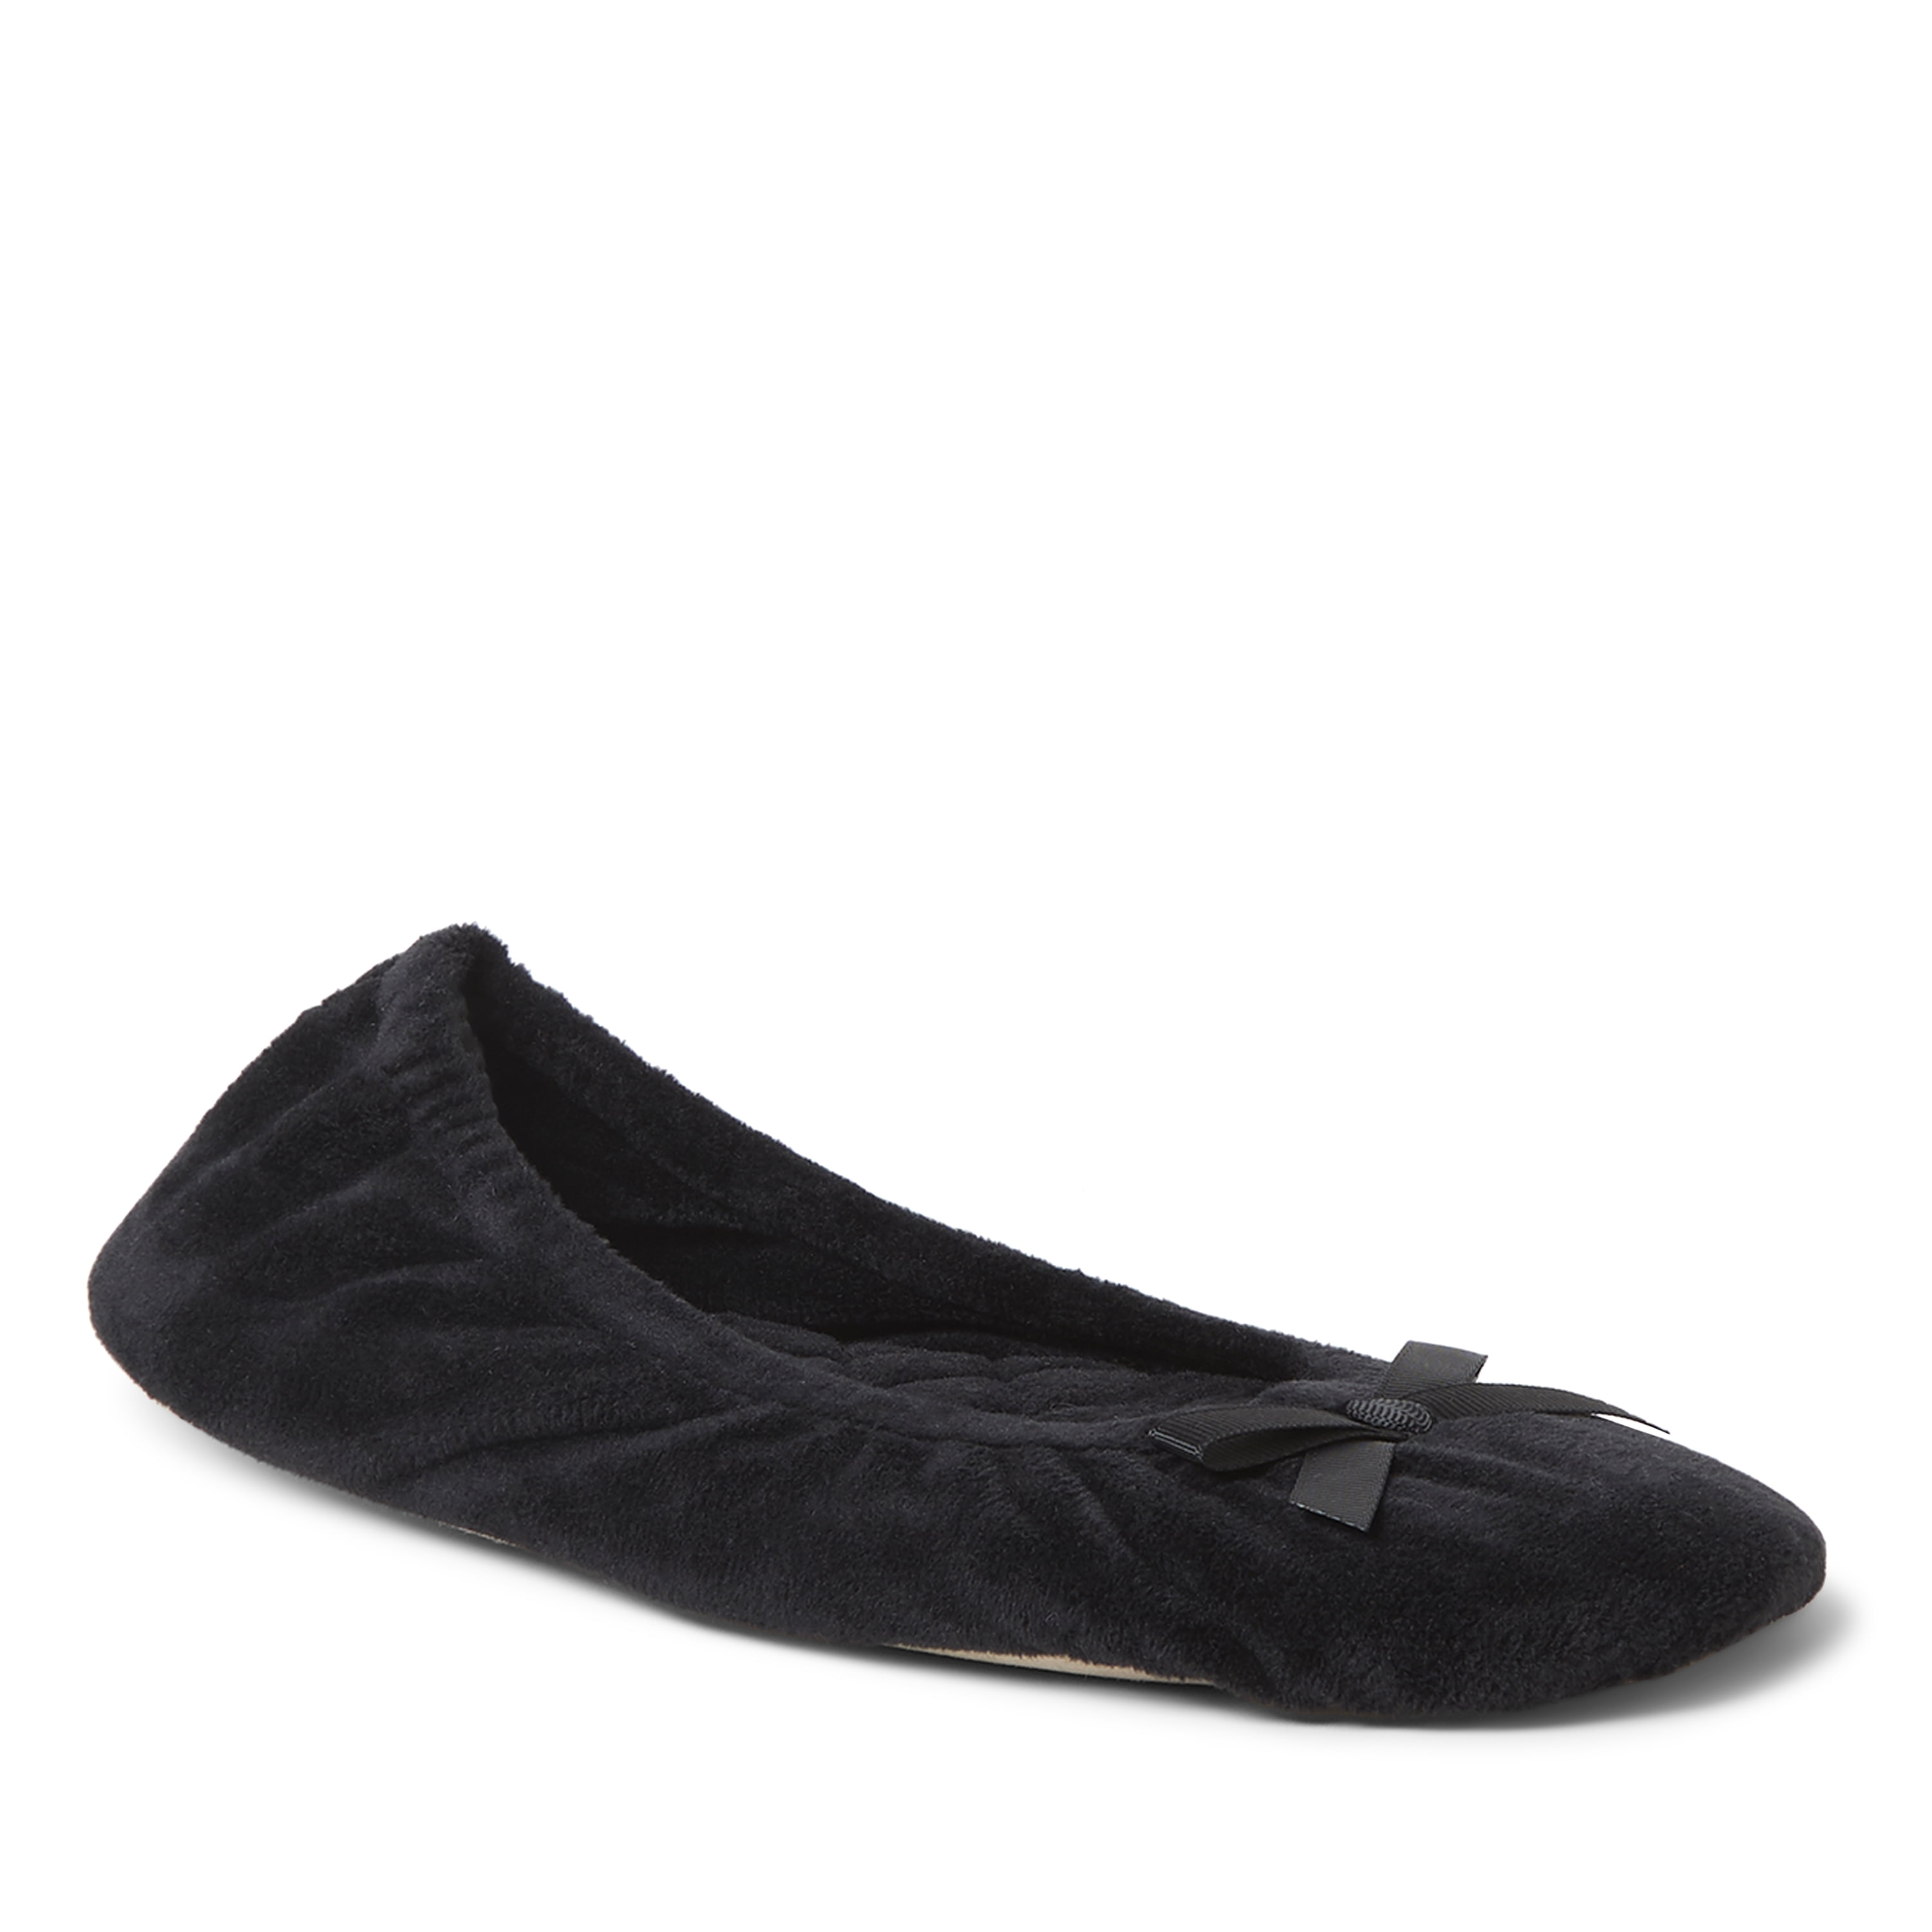 Dearfoams Slippers Ballet Flats with Bow